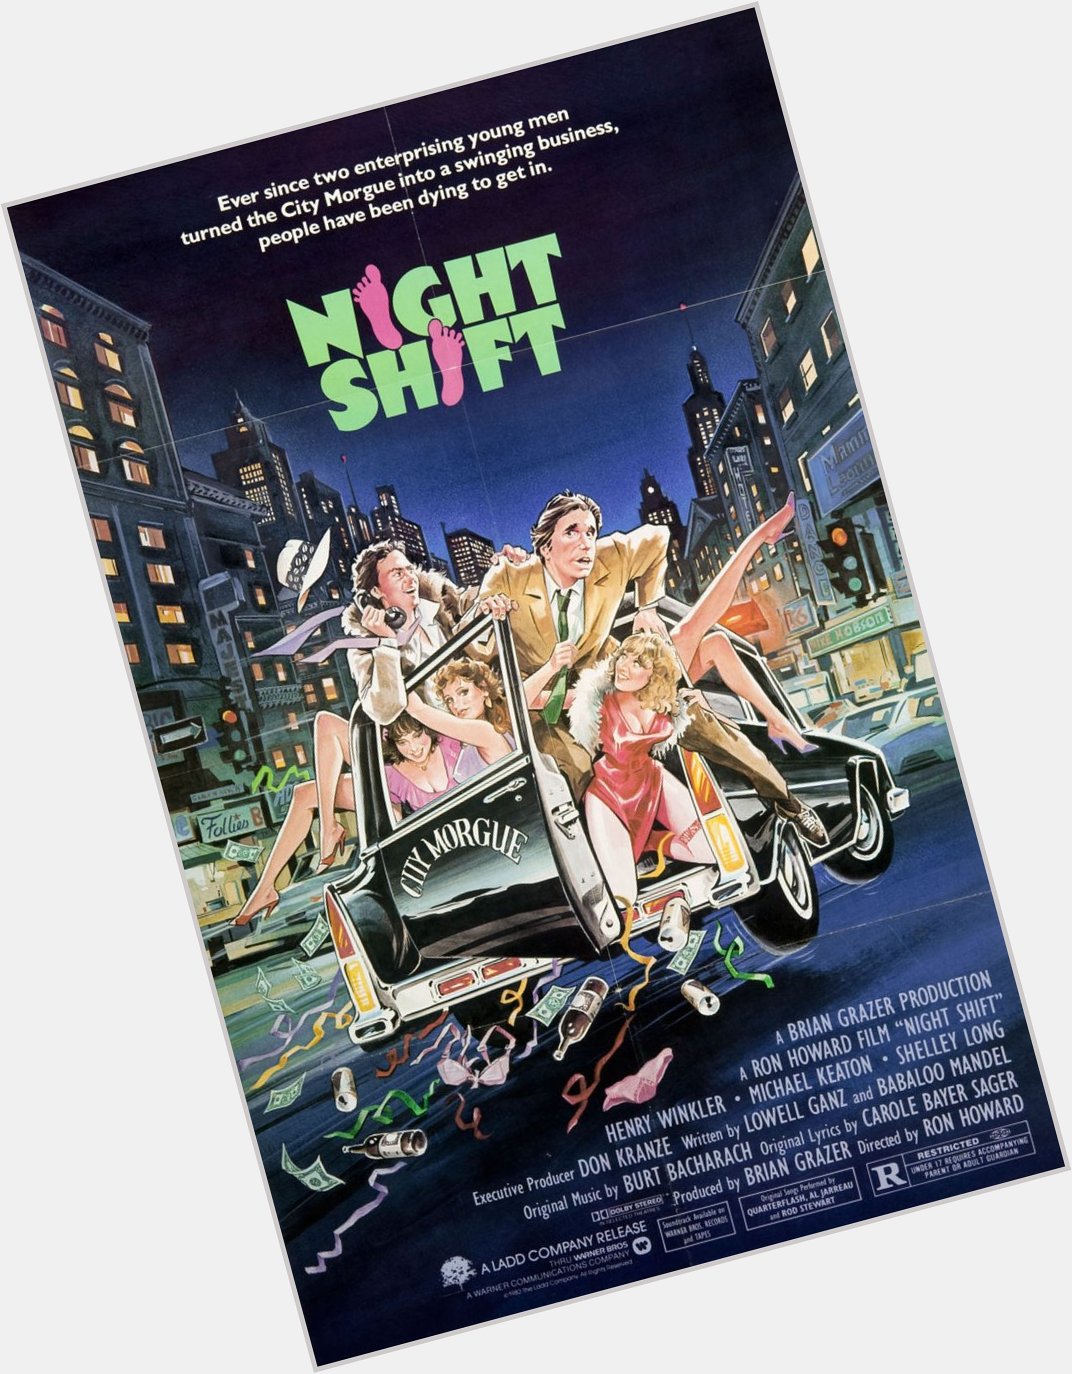 Happy birthday Ron Howard! What\s your favorite Ron Howard film or role? We\ll start: Night Shift! 